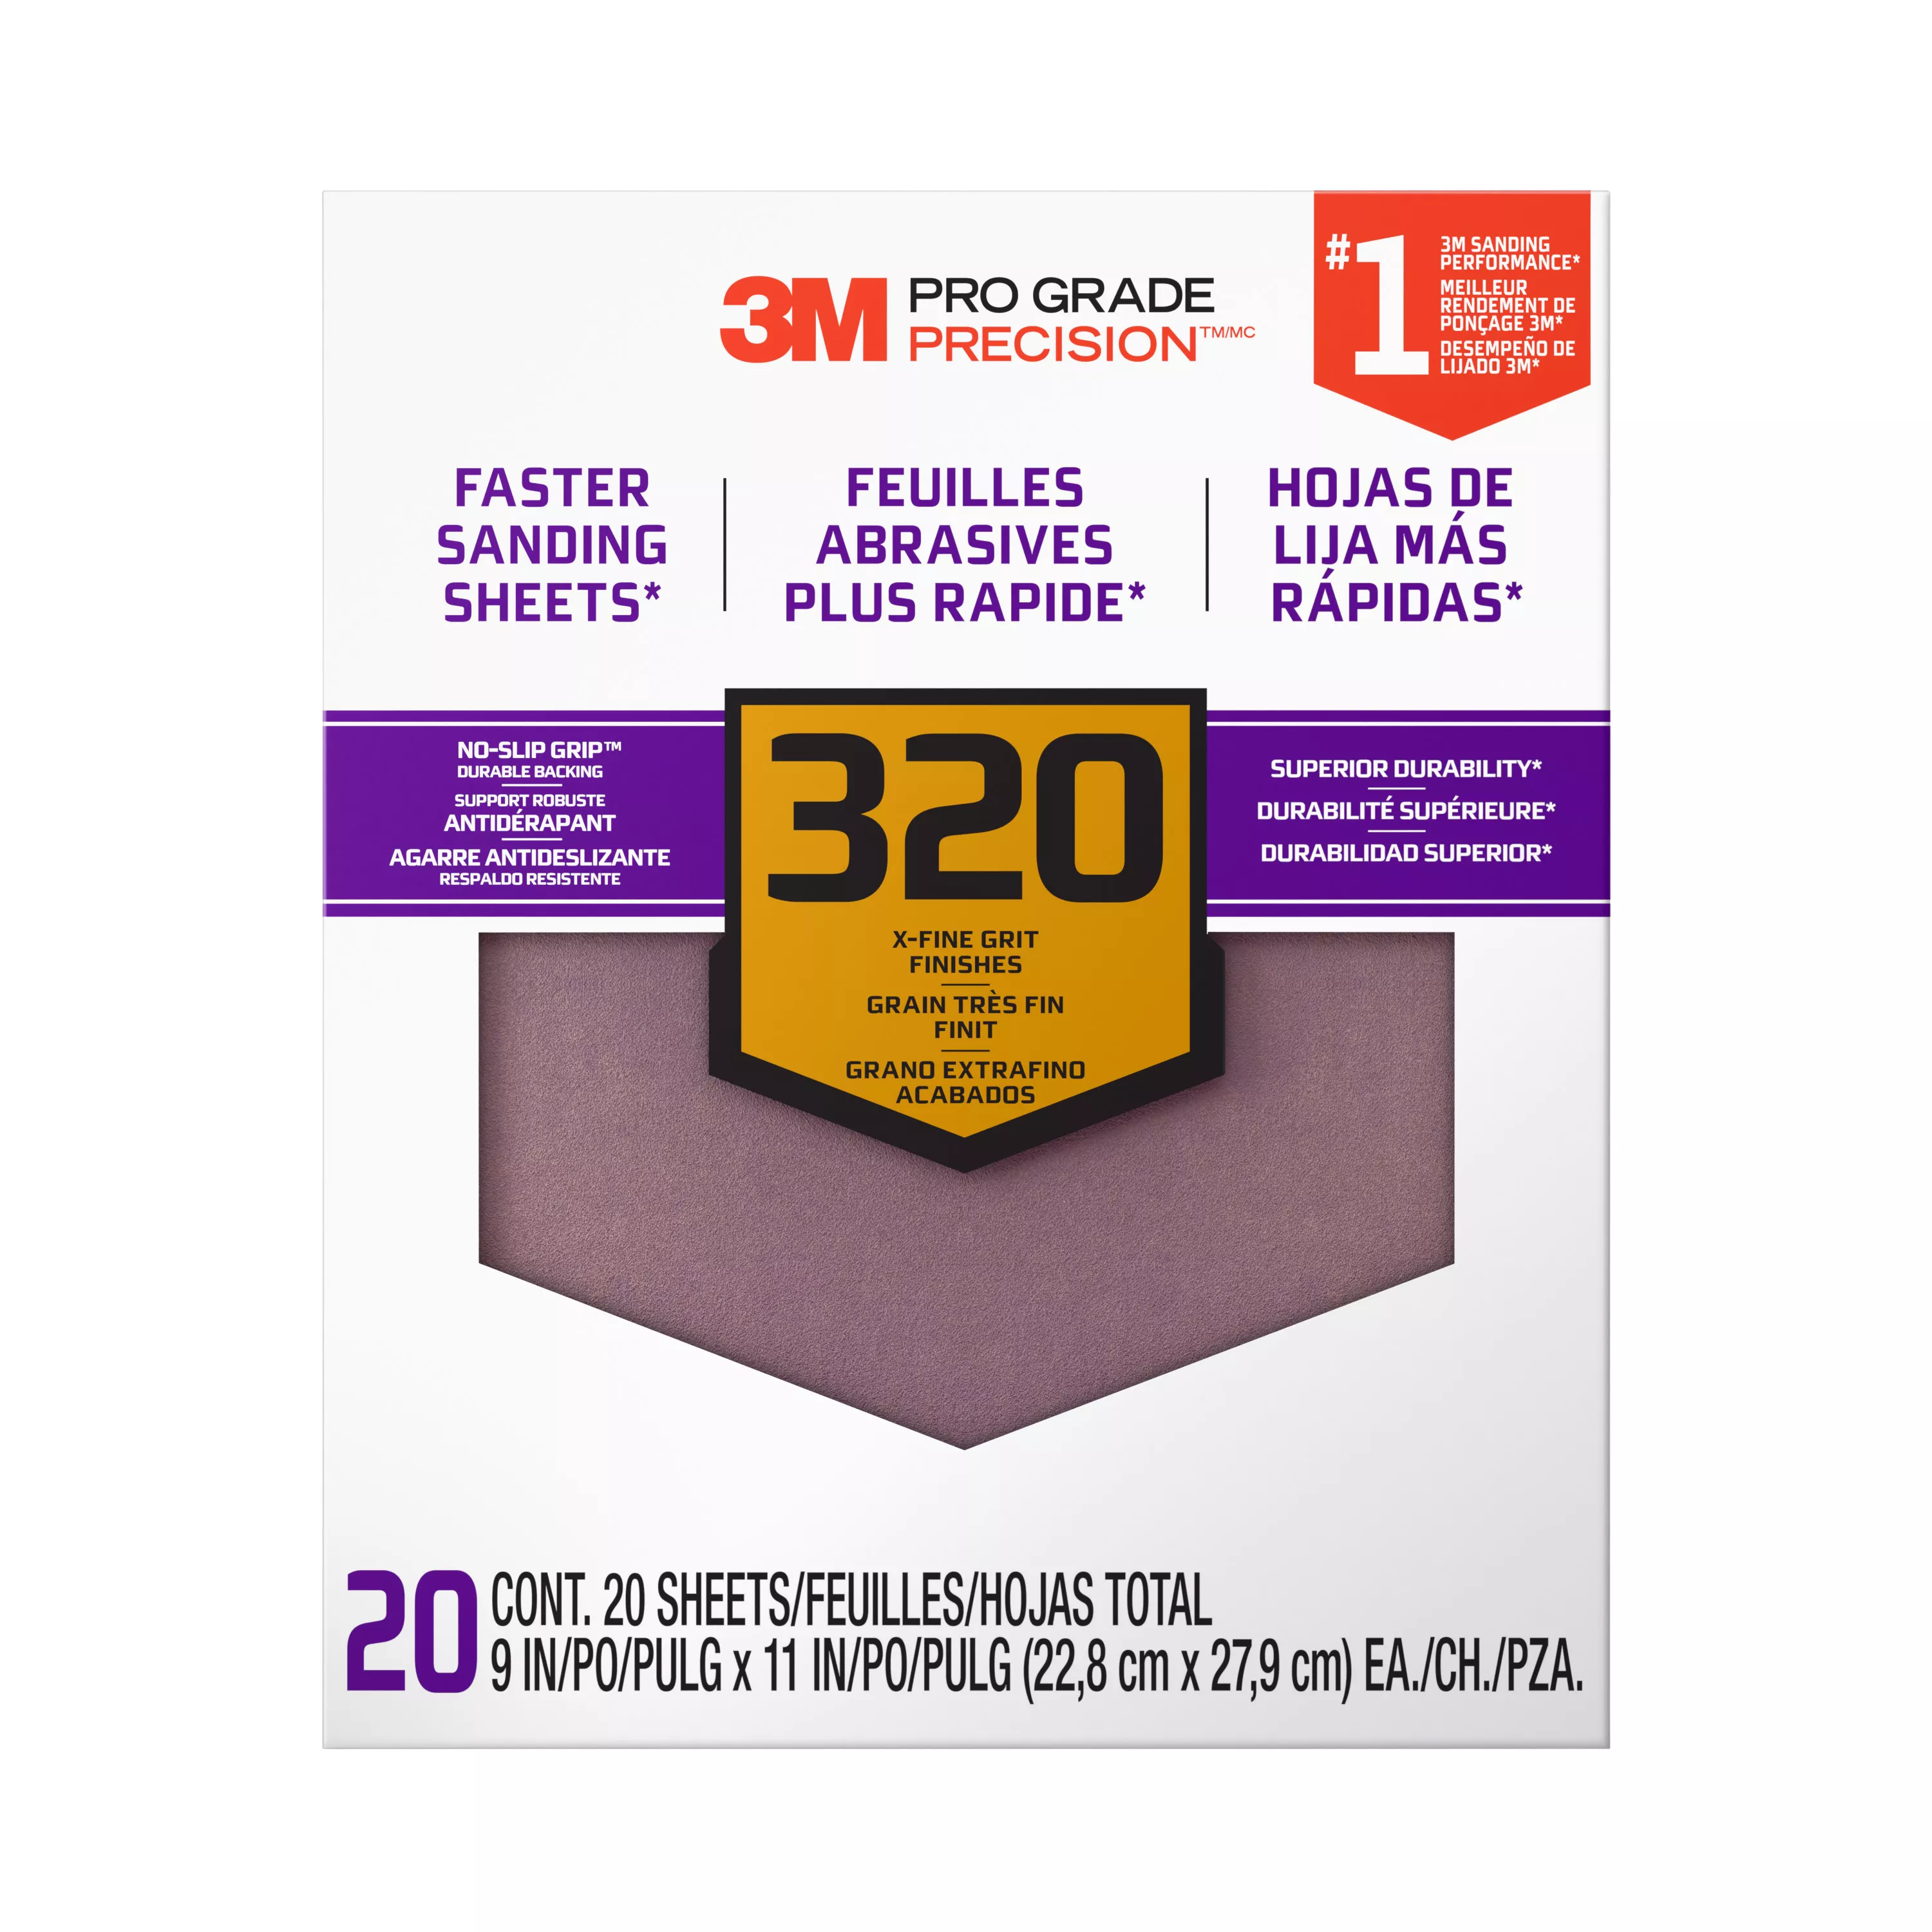 3M™ Pro Grade Precision™ Faster Sanding Sheets w/ NO-SLIP GRIP™ Backing SHCP320-PGP20T, 9 in x 11 in, 320 Gr, 20 Shts/pk